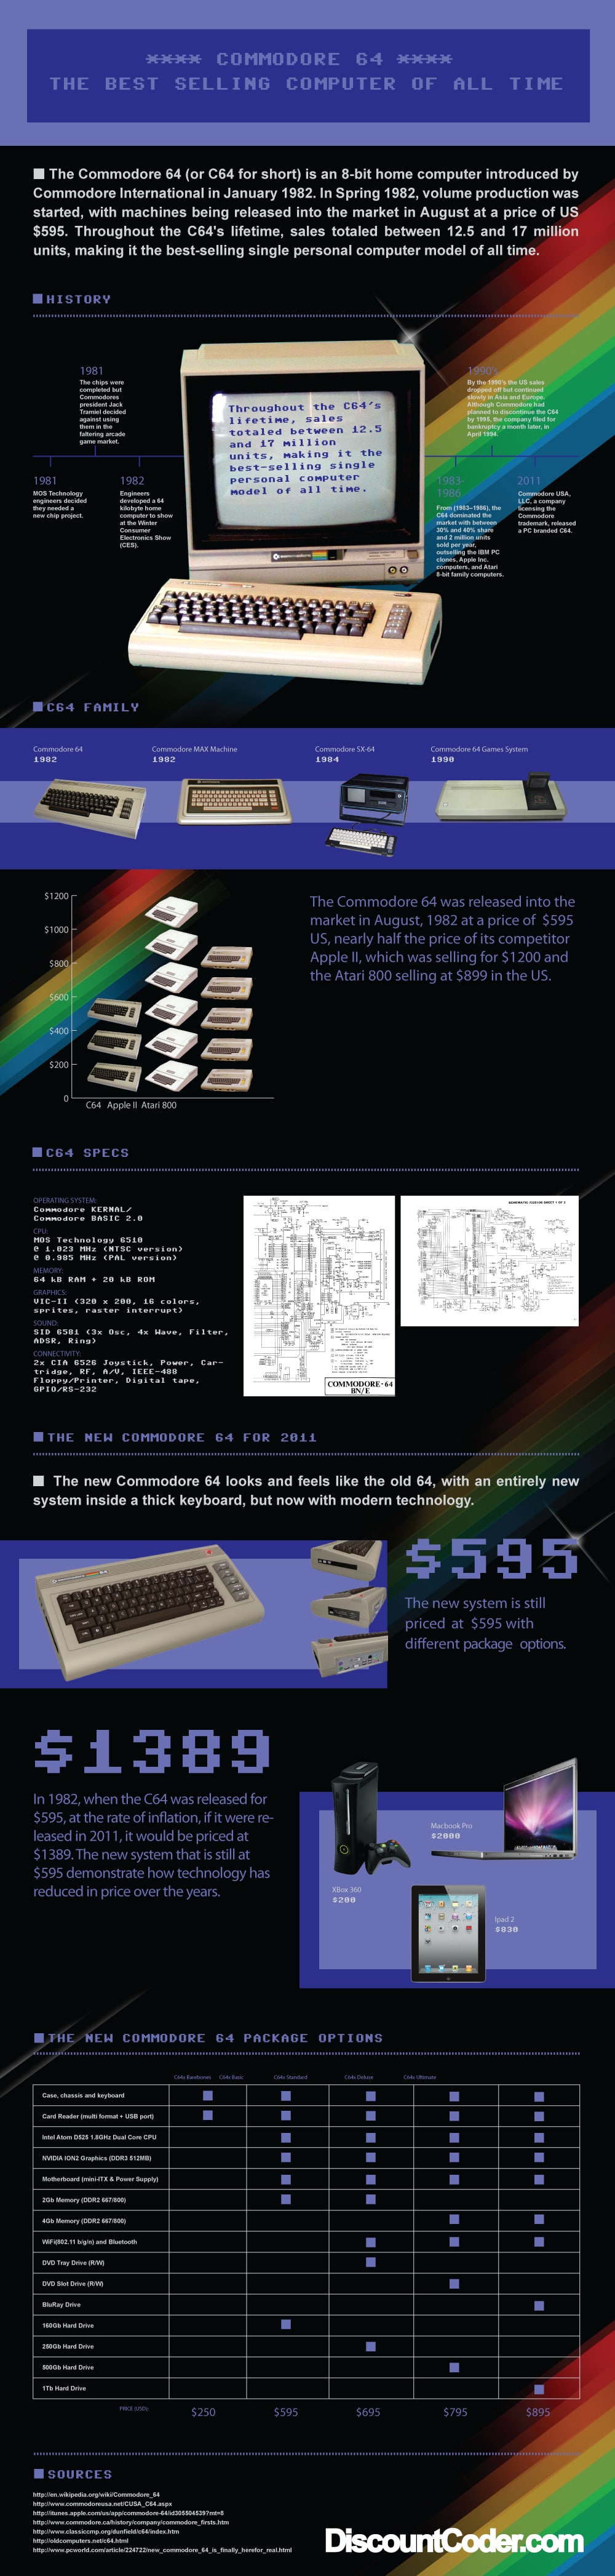 Commodore 64 History Timeline Infographic